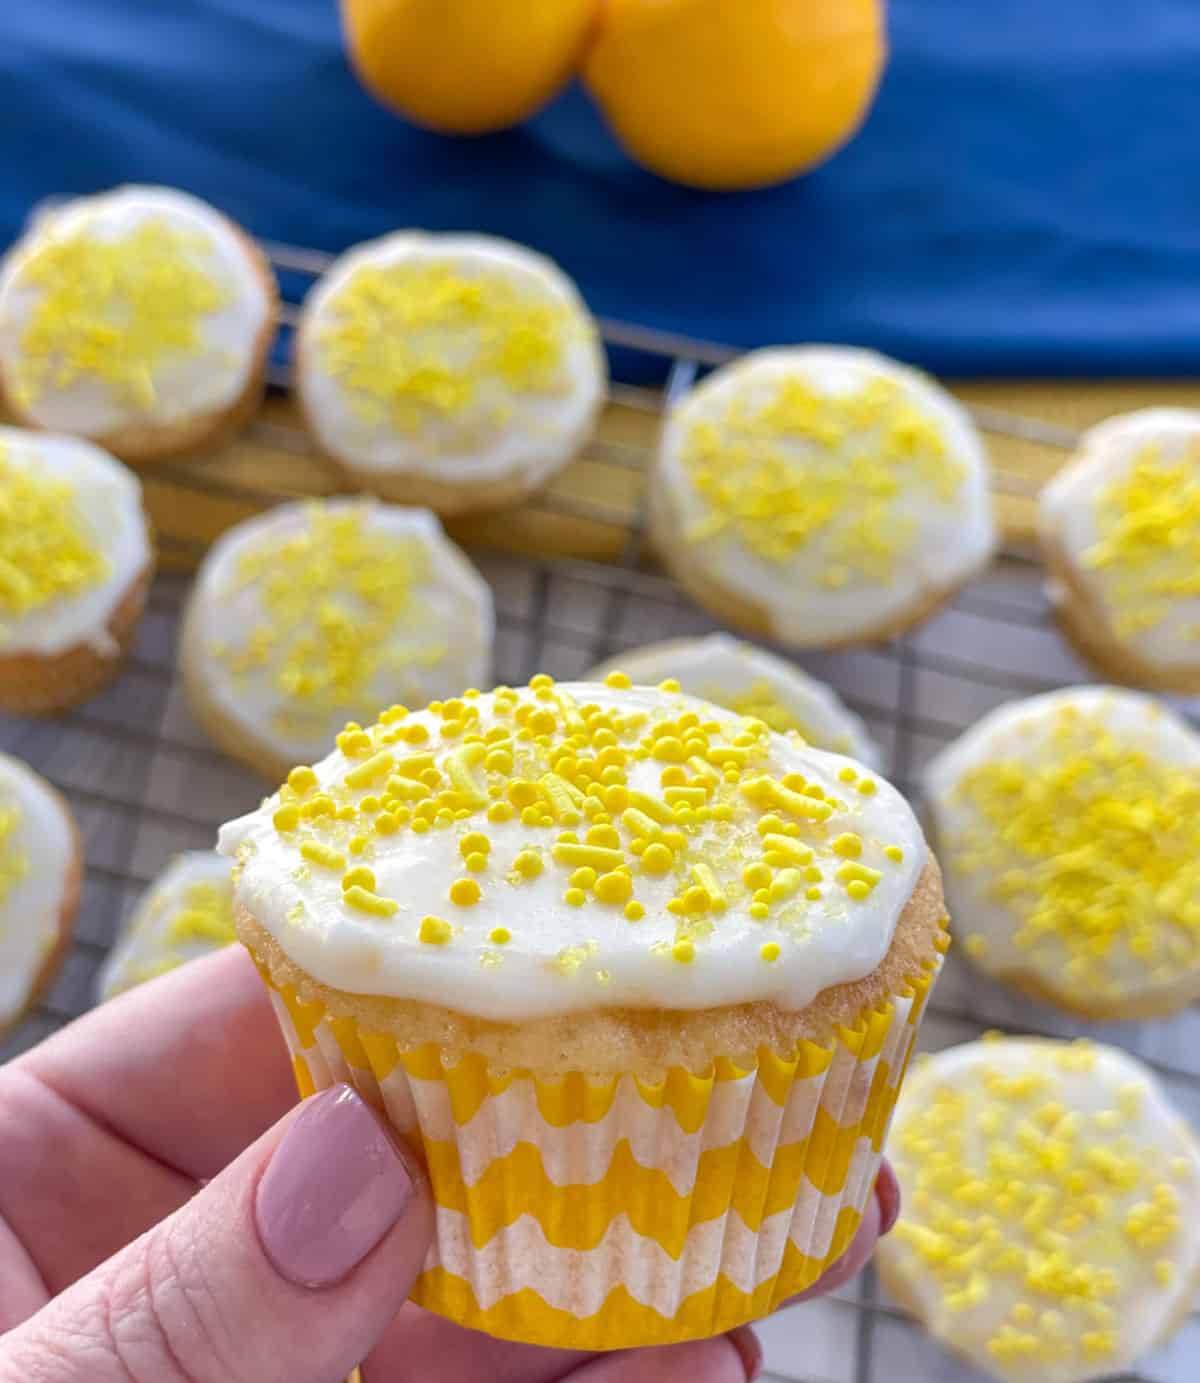 Hand holding a lemon cupcake with basic lemon icing, yellow cupcake cases and yellow sprinkles on top